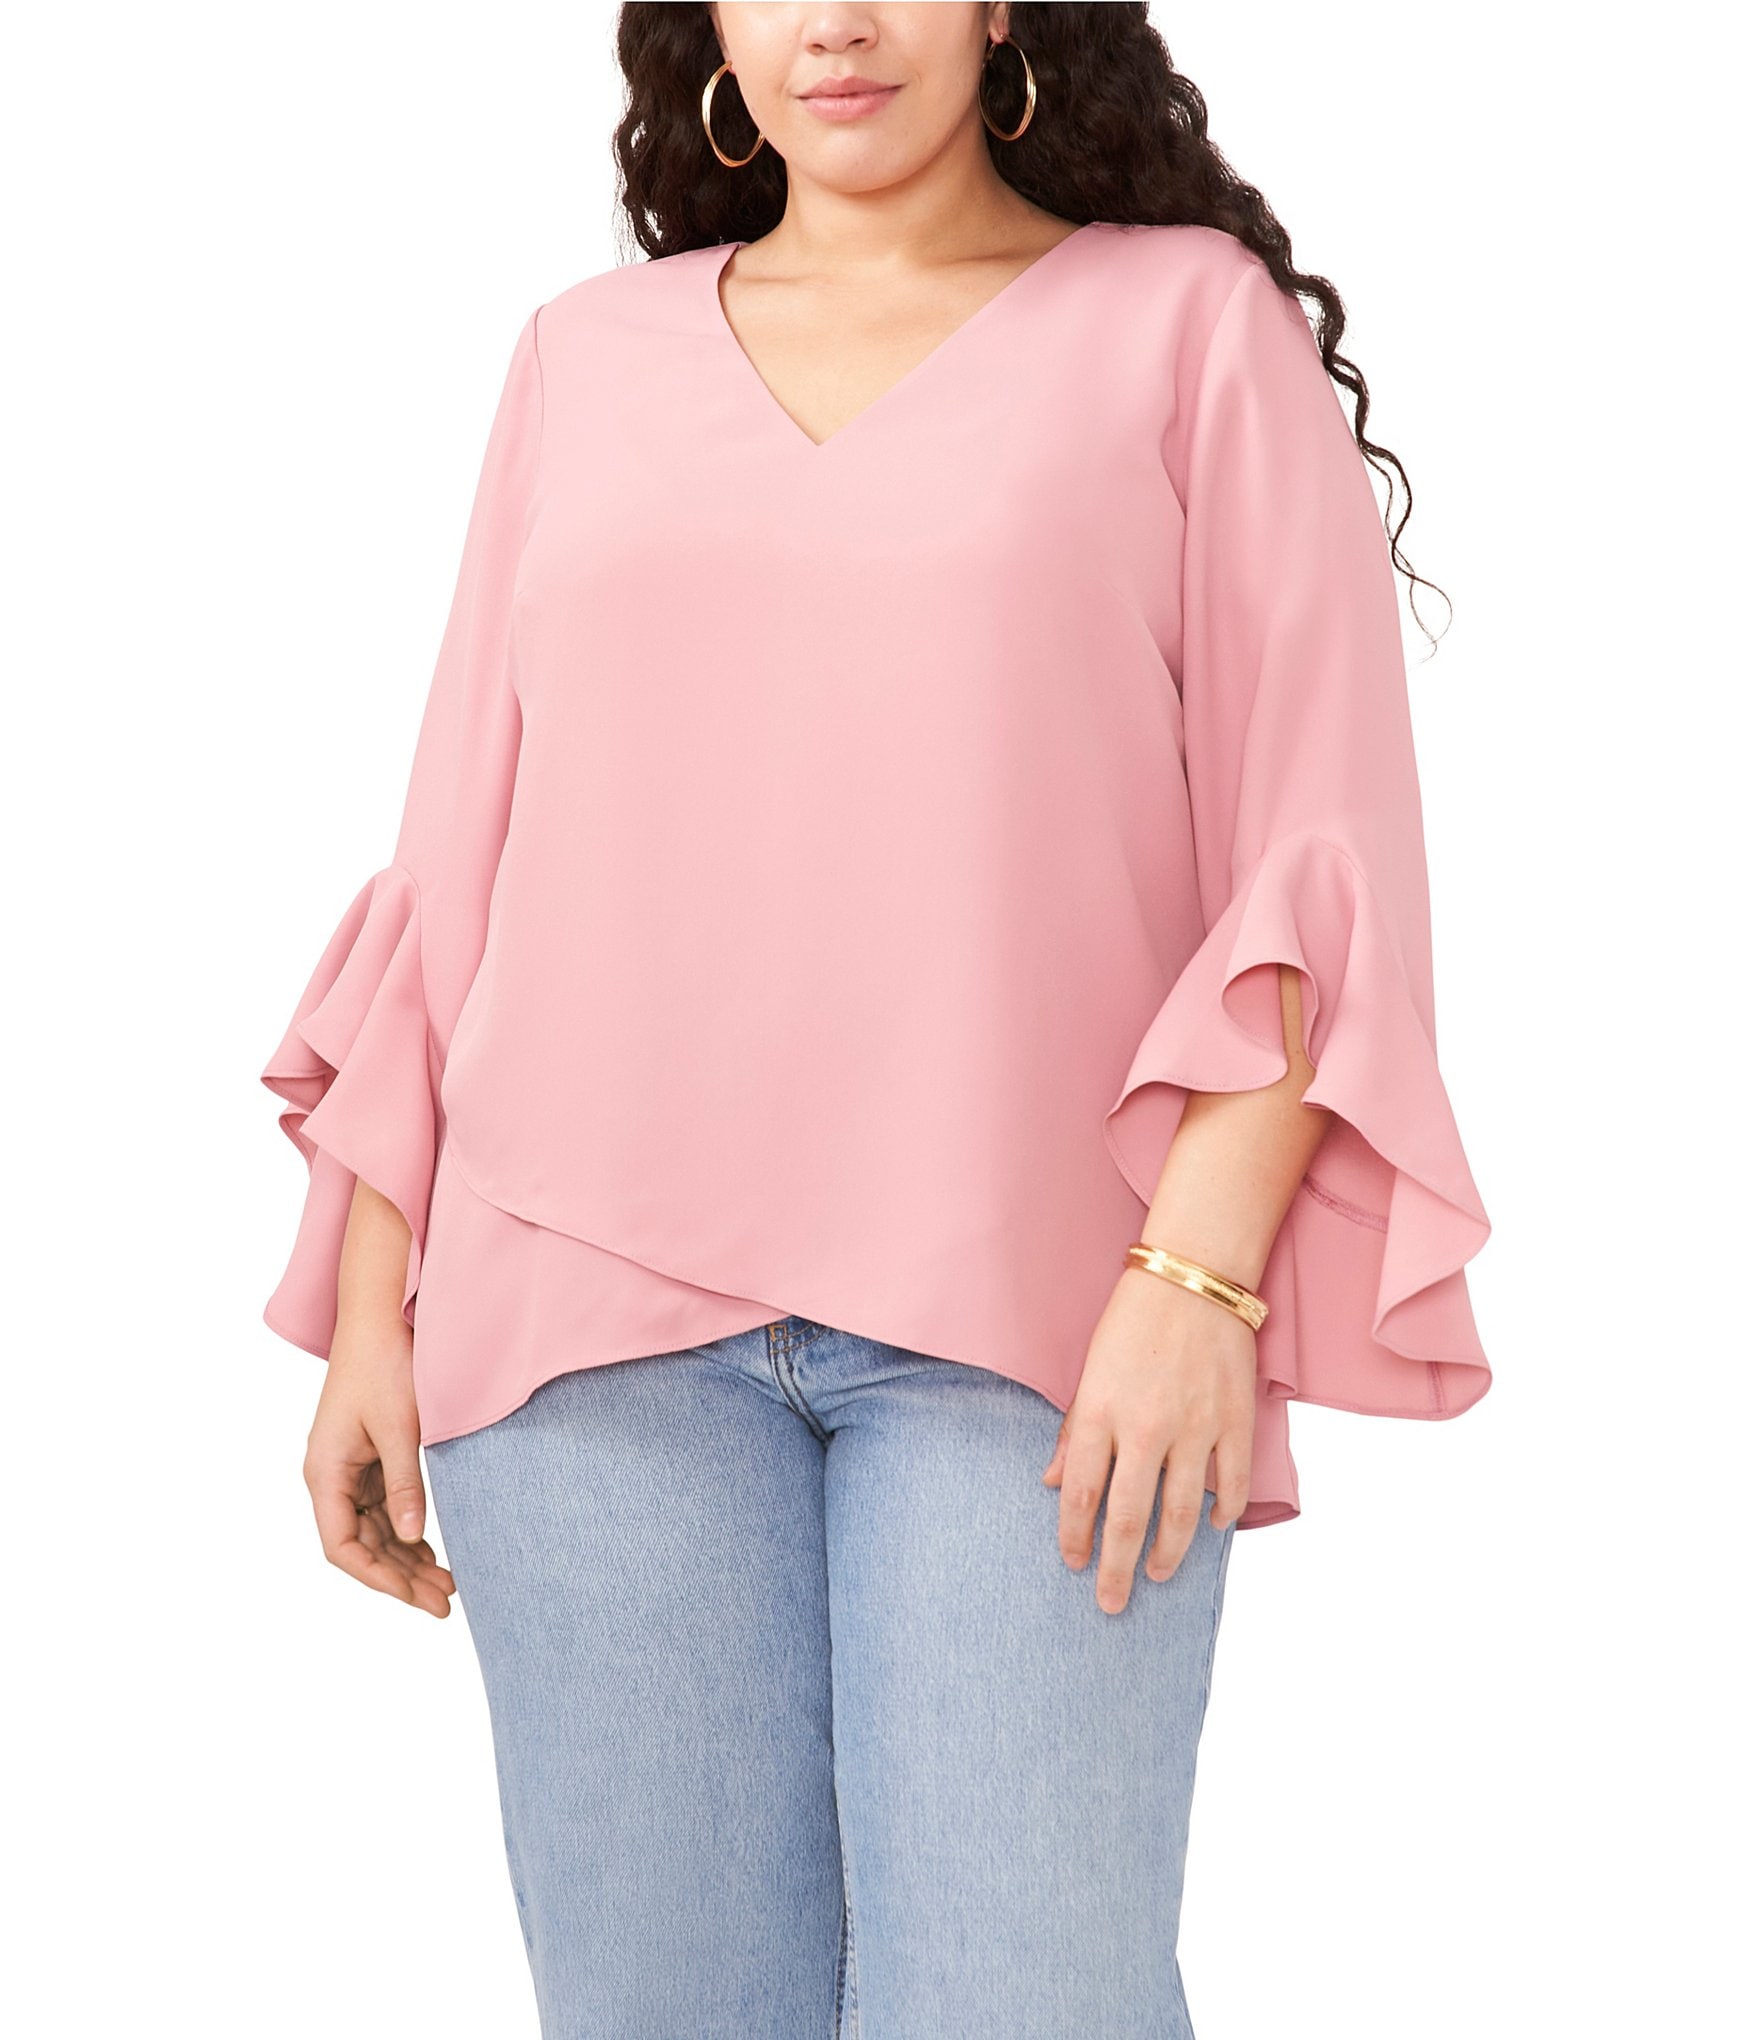 Plus Size Sweatshirts for Women Oversized Colorblock Pullover Tops 1X-5X